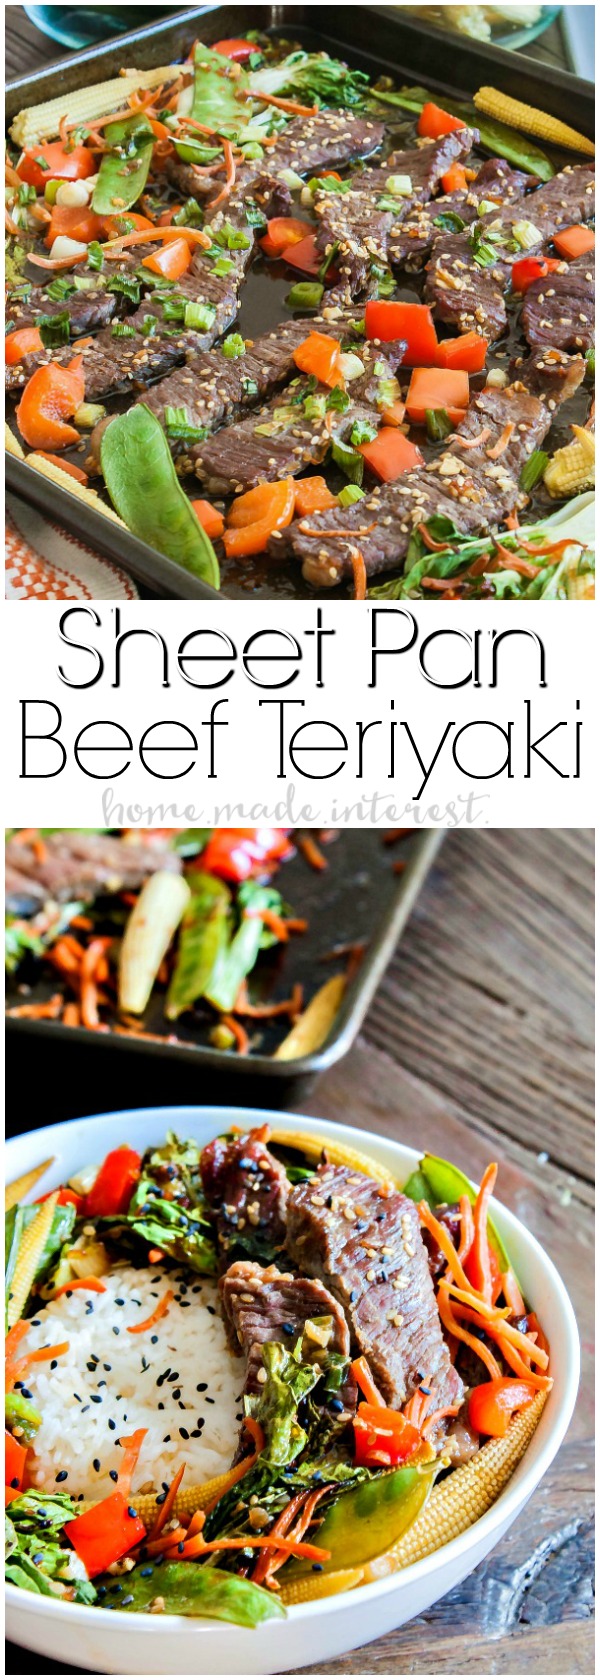 Sheet Pan Beef Teriyaki | This easy sheet pan meal is an easy weeknight dinner recipe that takes less than 30 minutes to make. Sheet pan beef teriyaki recipe is thin slices of beef tossed in teriyaki sauce and baked with asian vegetables. Serve this easy sheet pan dinner recipe over rice or noodles for a quick and easy dinner. 